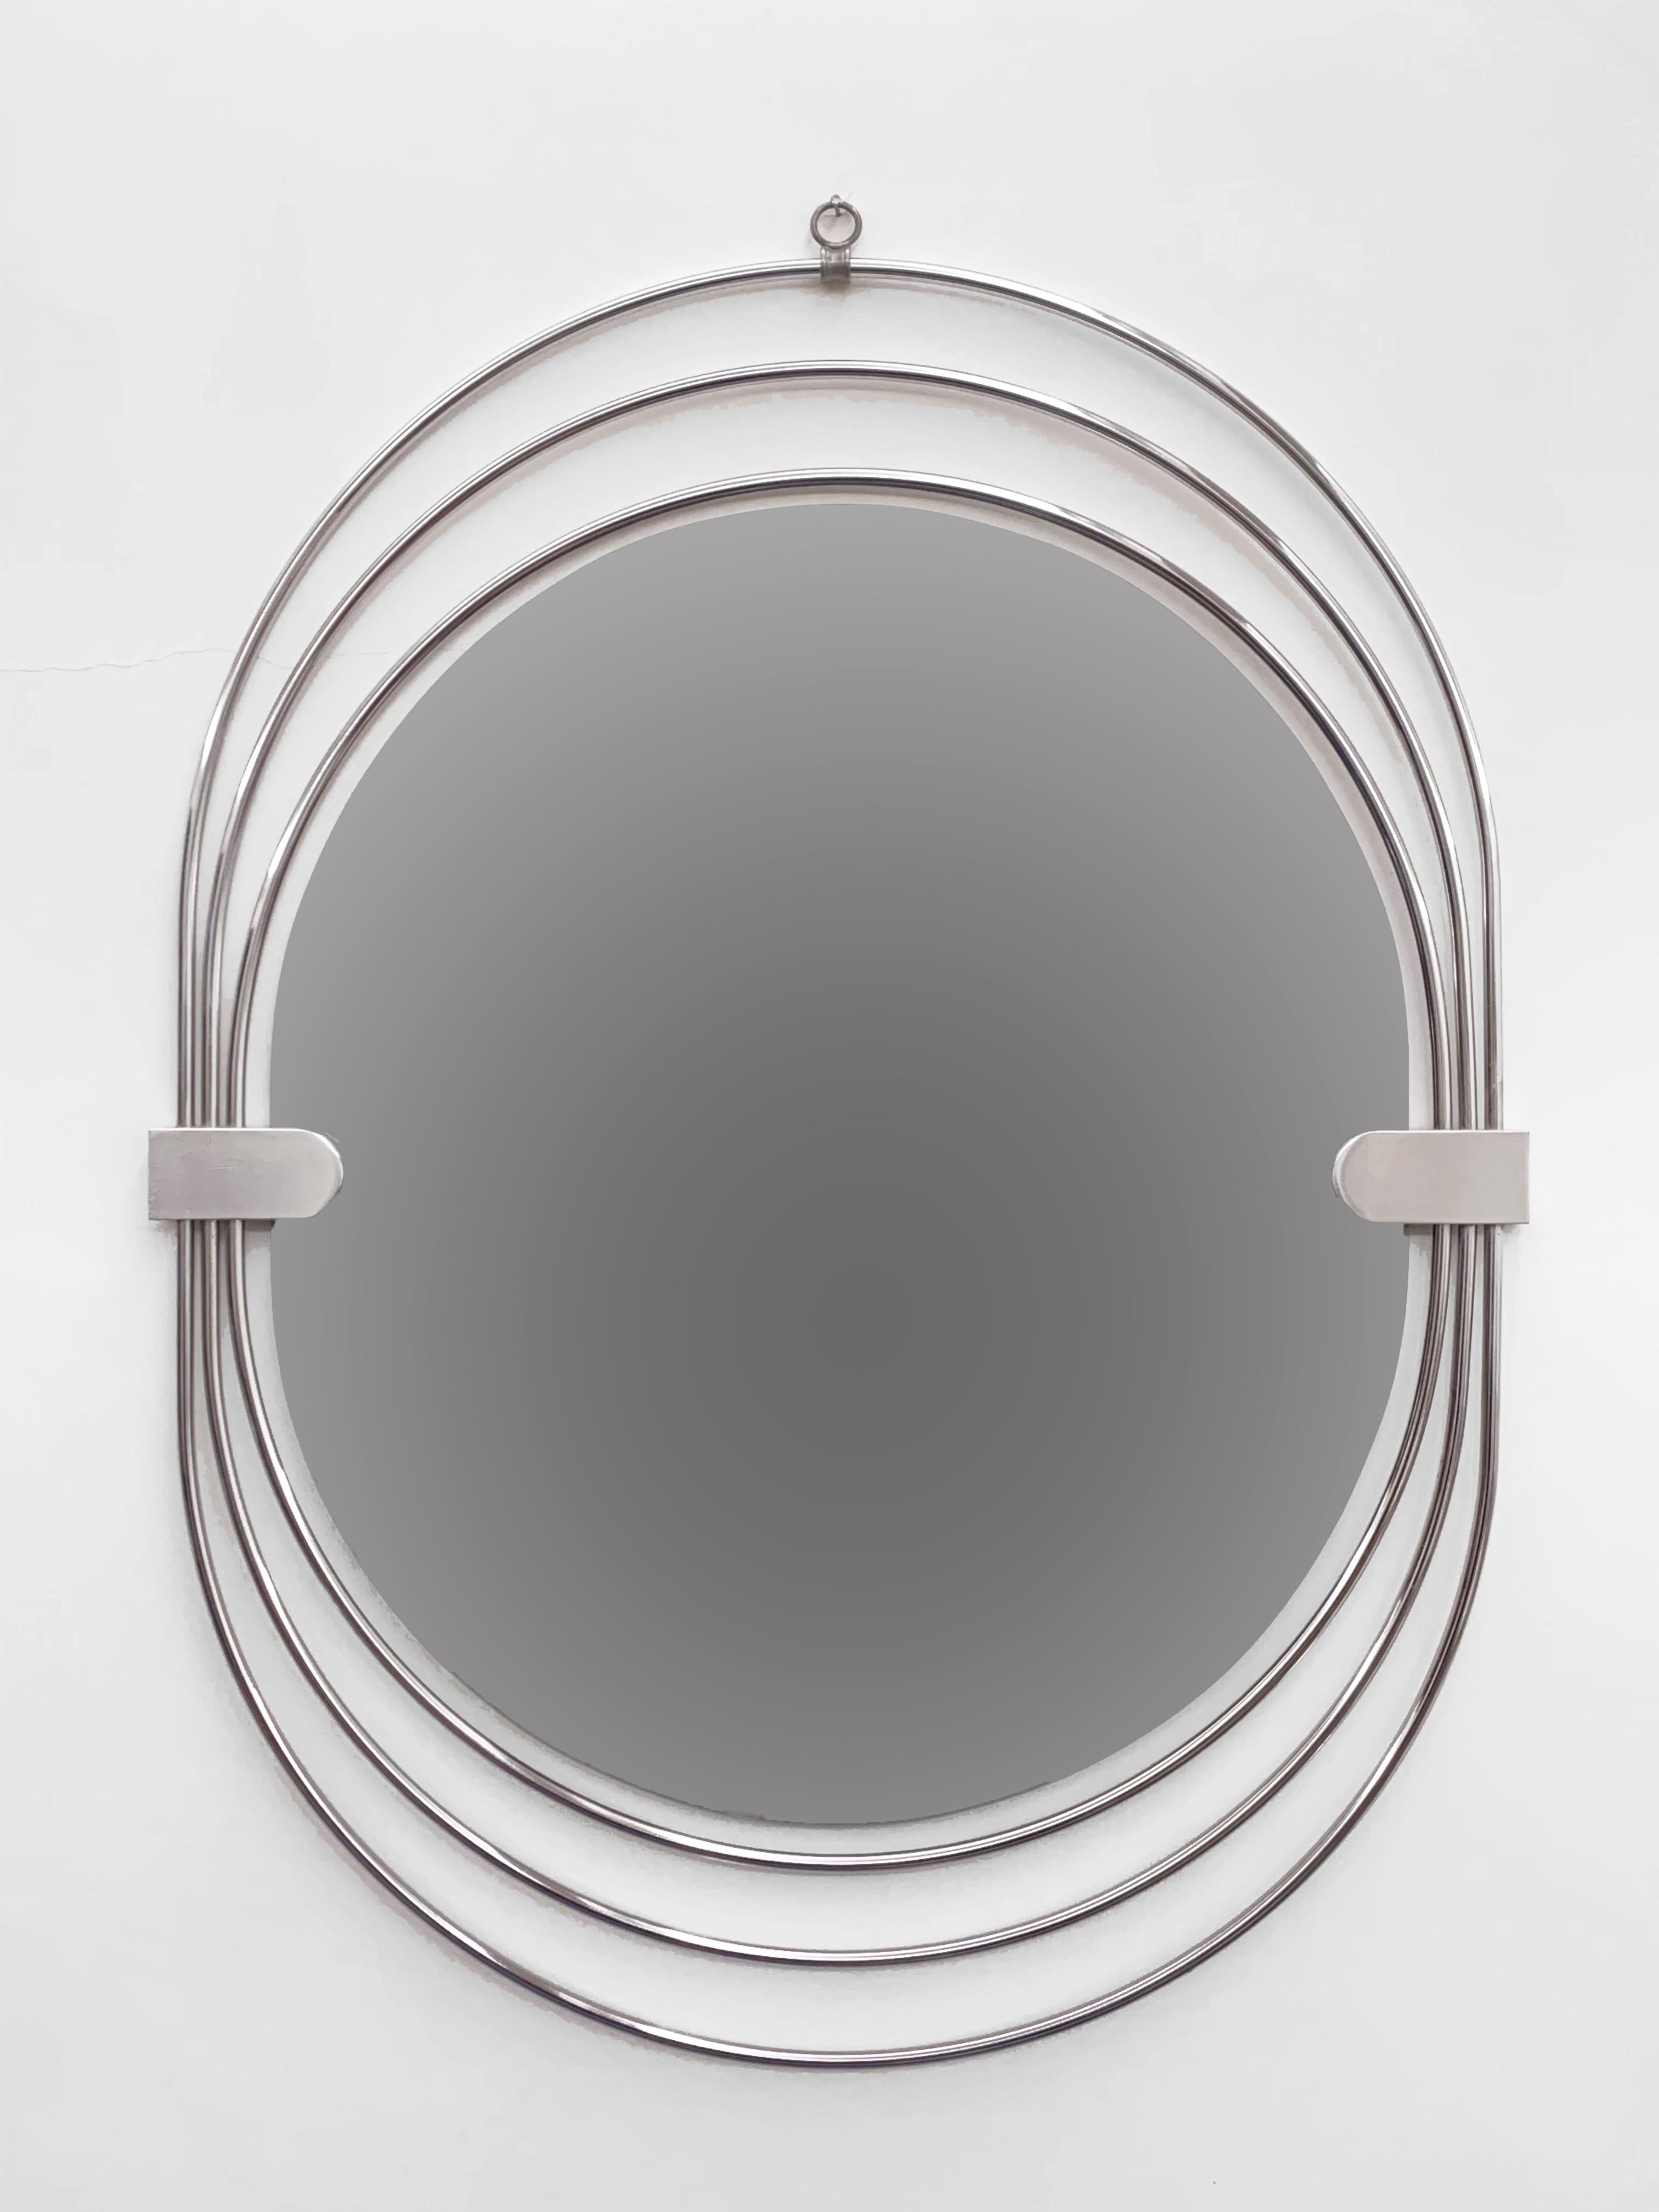 Beautiful mirror in stainless steel with a fresh and modern line. Measures: cm. 80 x 60.